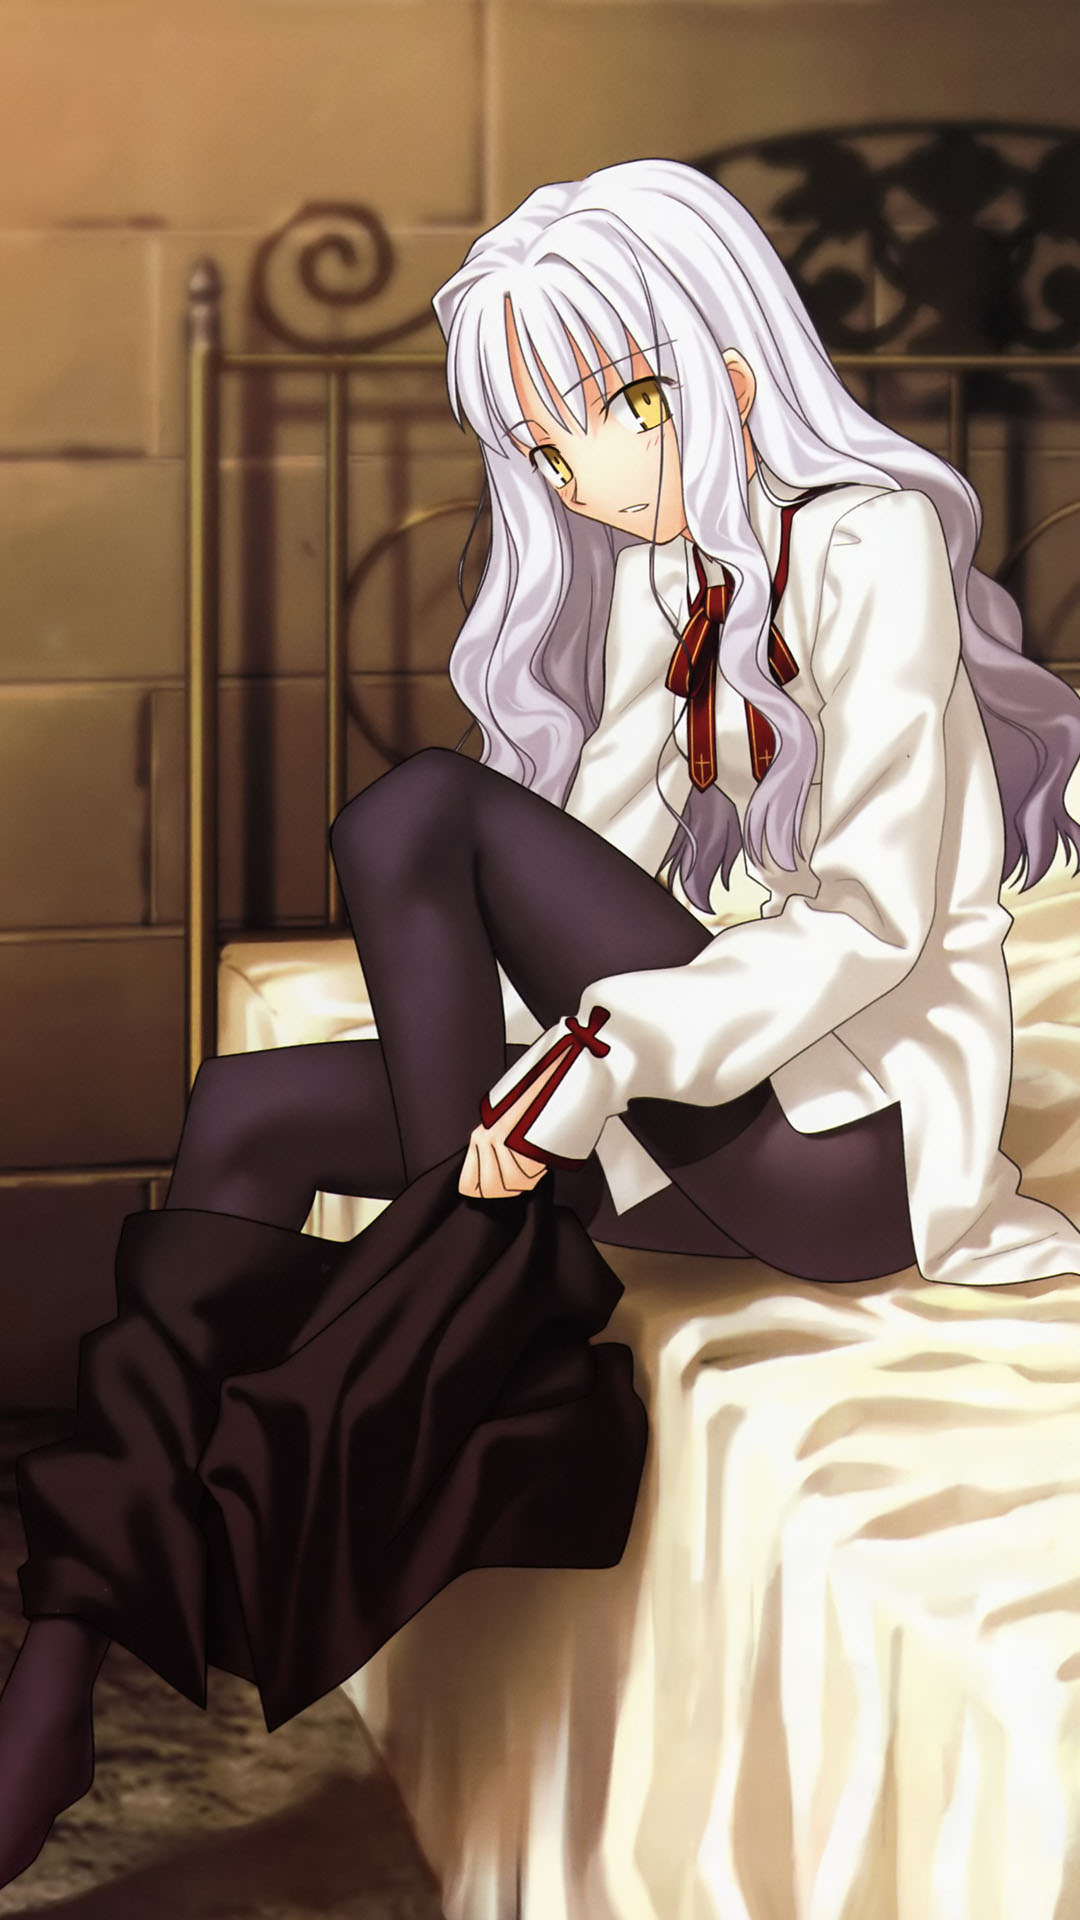 Fate Stay Night Fate Hollow Ataraxia カレン オルテンシア Iphone6 Plus 1080 19 壁紙 Wallpaperboys Com